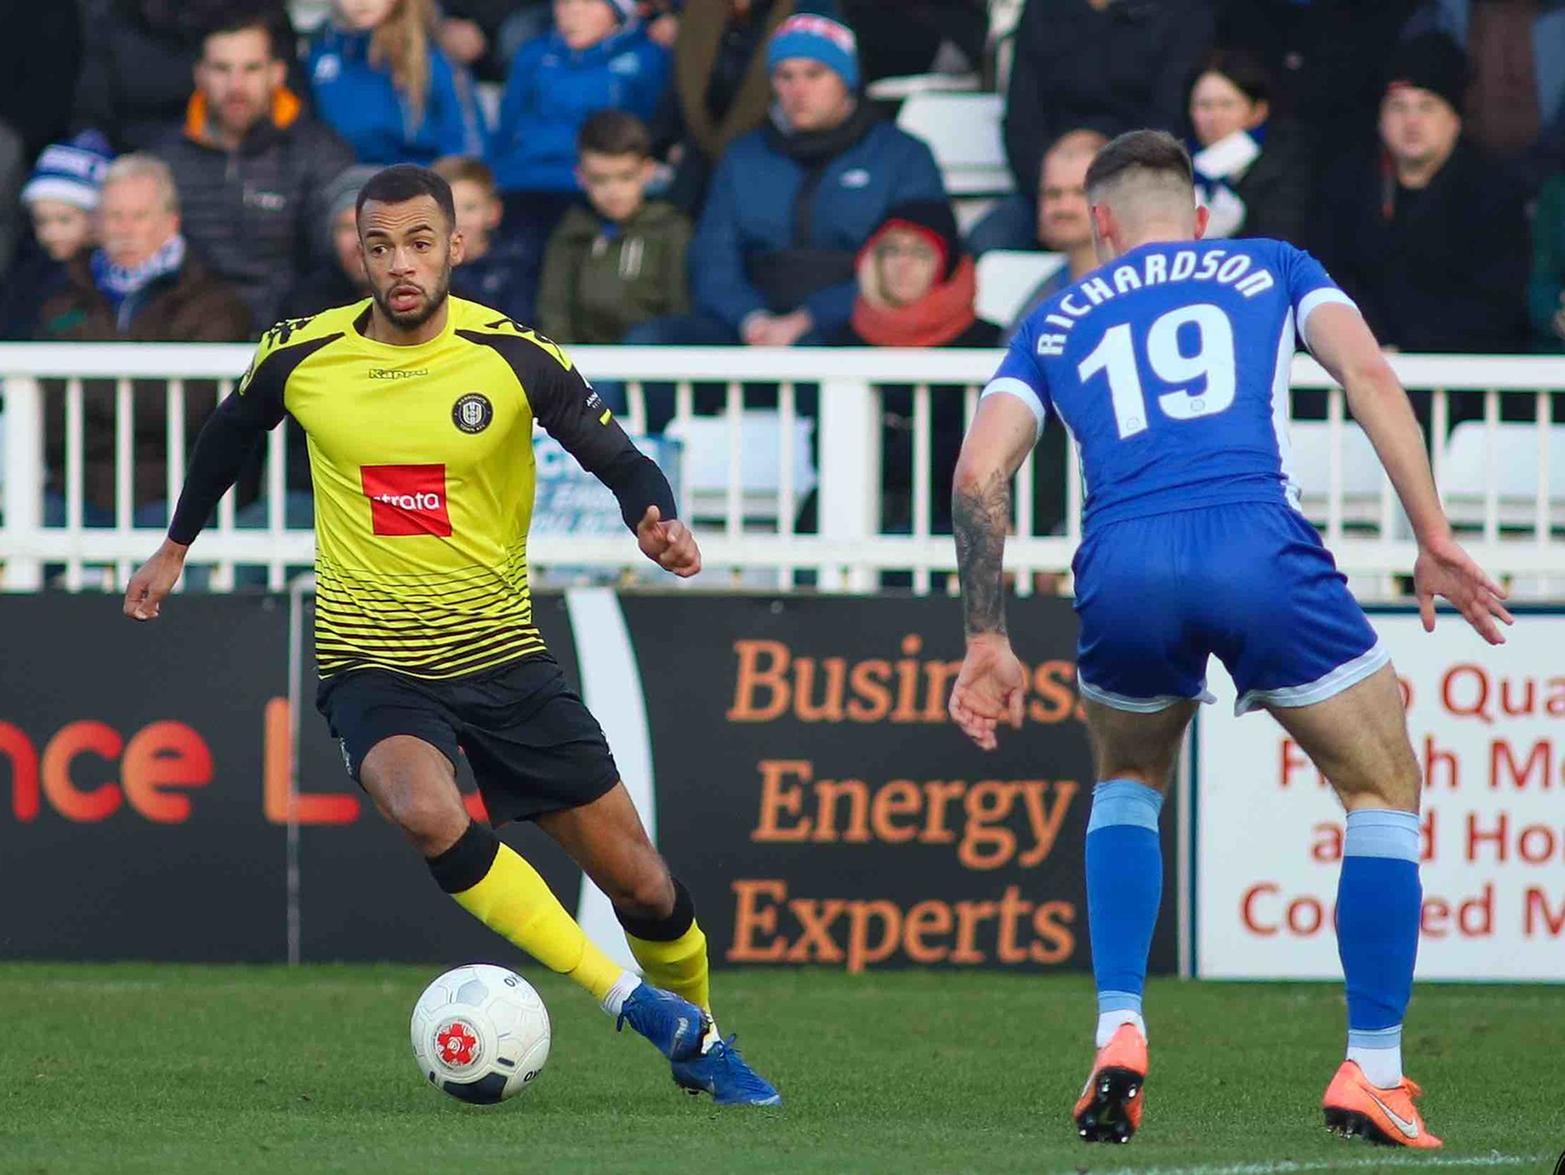 Warren Burrell 8. Another solid showing out of position at left-back. Committed, disciplined and only denied what looked a certain goal by Gary Liddle's excellent first-half block.